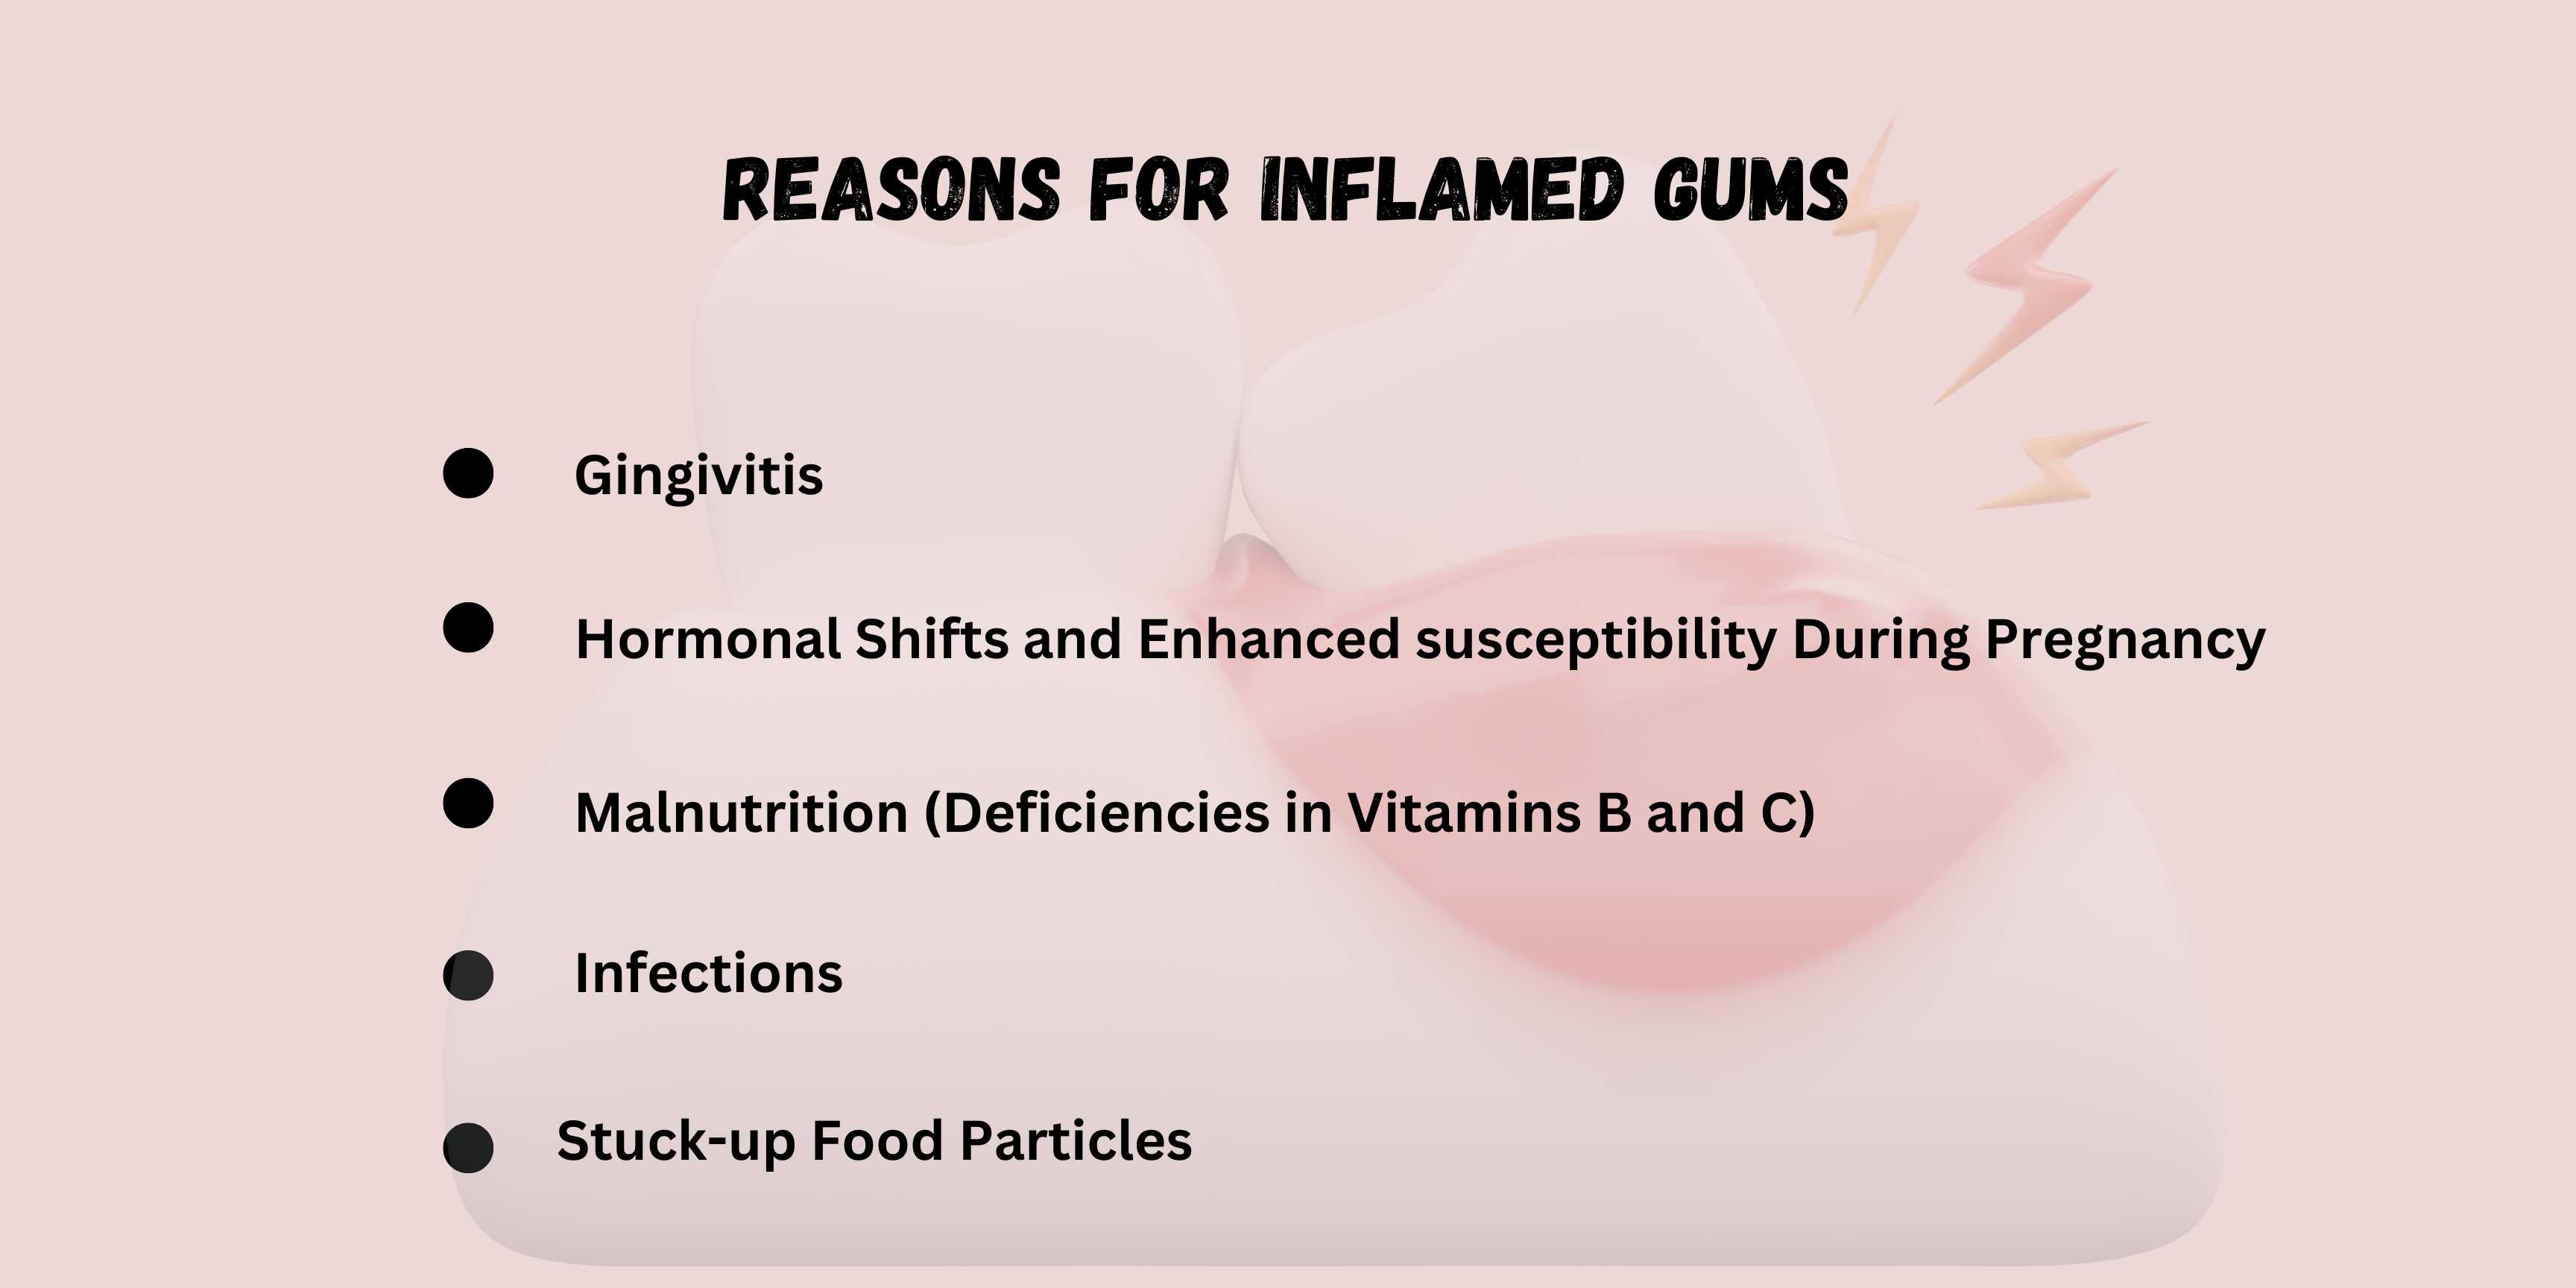 Reasons for Inflamed Gums